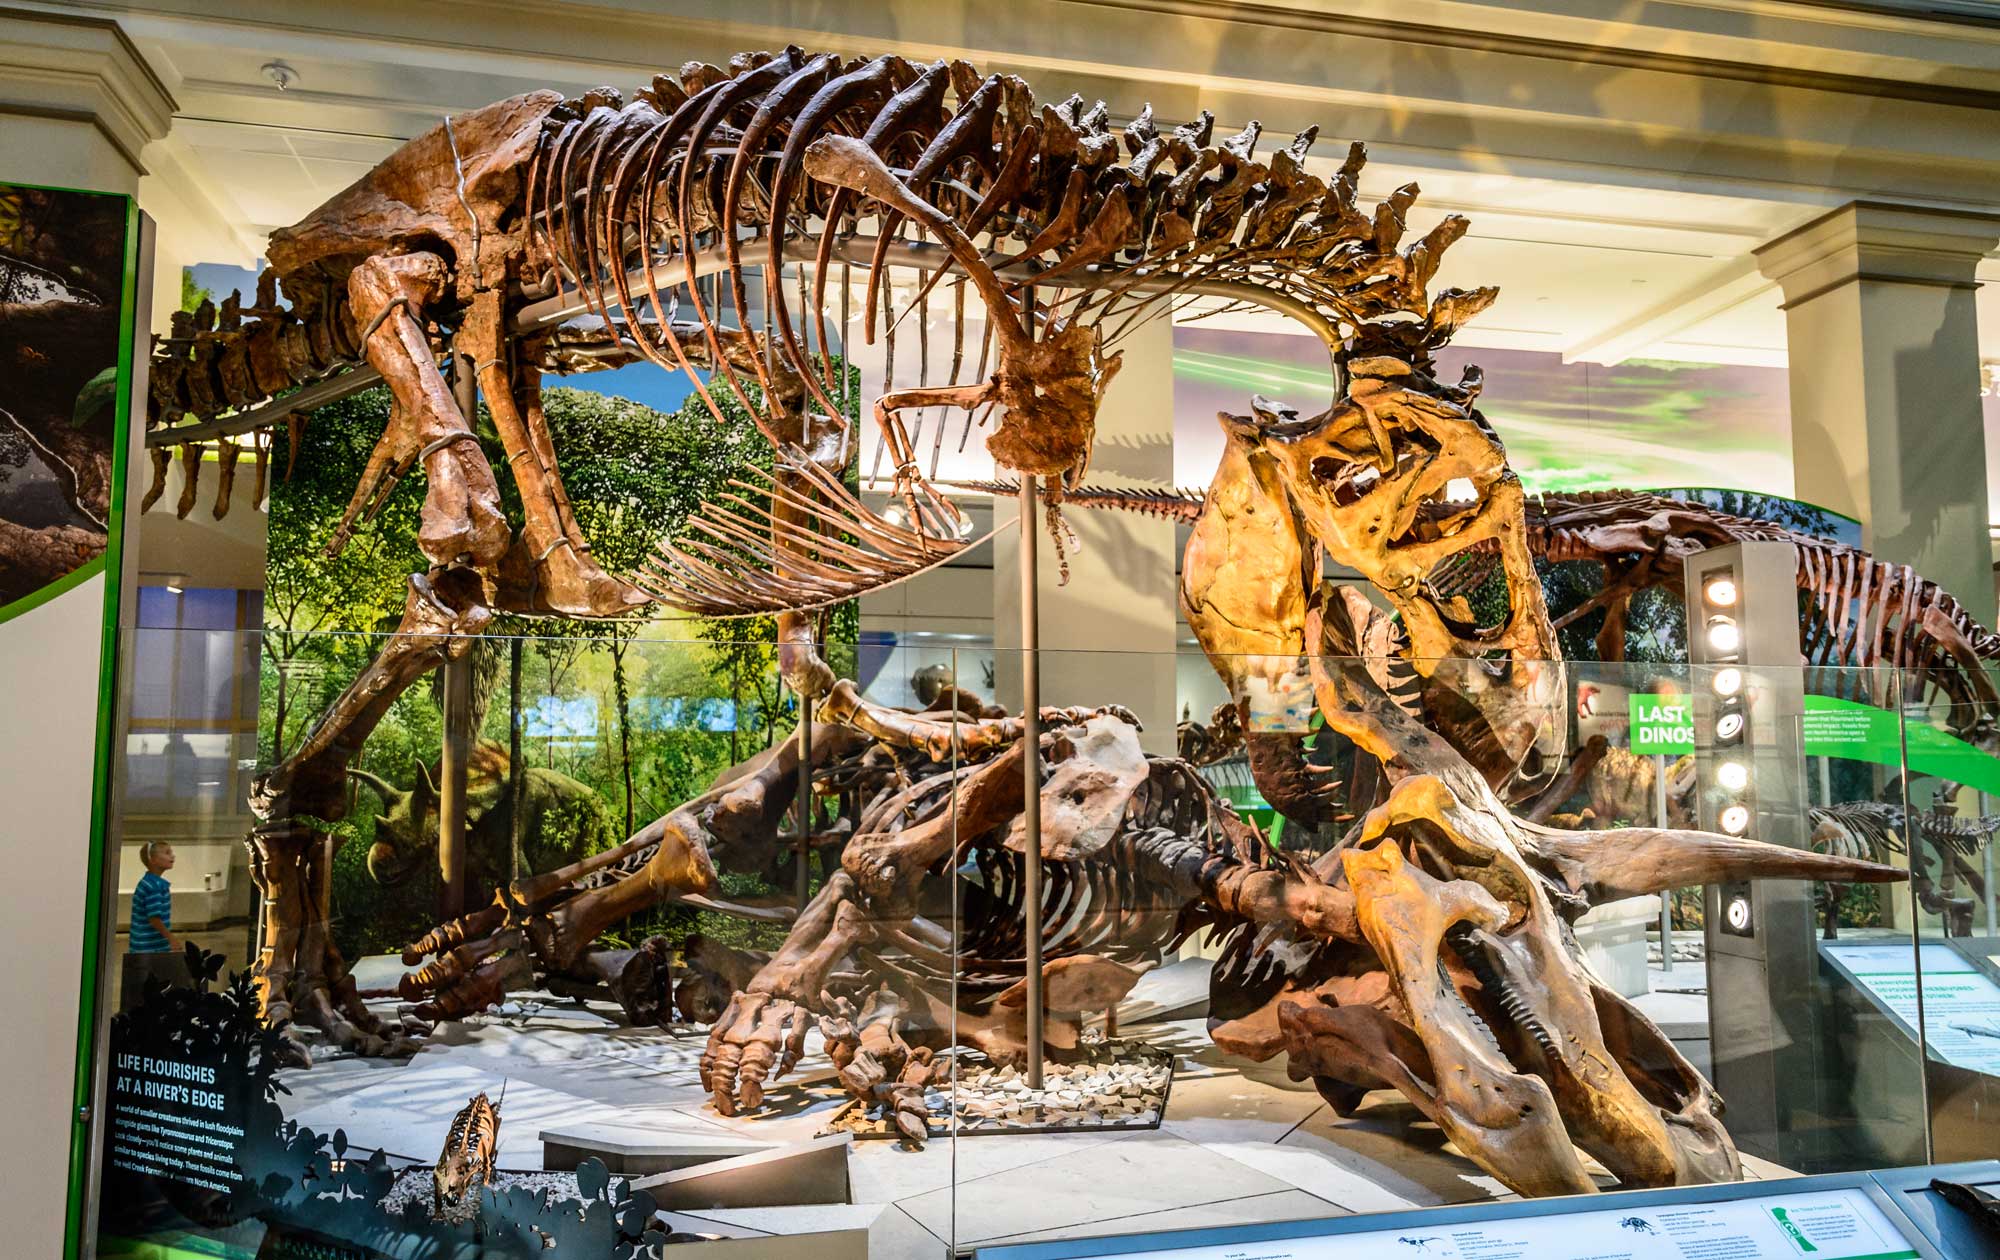 Photograph of a mounted Tyrannosaurus rex specimen called "The Nation's T. rex" on display at the Smithsonian in Washington, D.C. Tyrannosaurus is a carnivorous dinosaur with a large skull and large, slightly curved, pointed teeth; it is bipedal, with powerful hind legs and relatively puny arms. The tail is long and held up off the ground. The photo is taken from the side, showing such of the skeleton, although most of the tail is not visible. The skeleton is mounted with its head bent over a prone Triceratops skeleton, apparently feeding on its carcass.